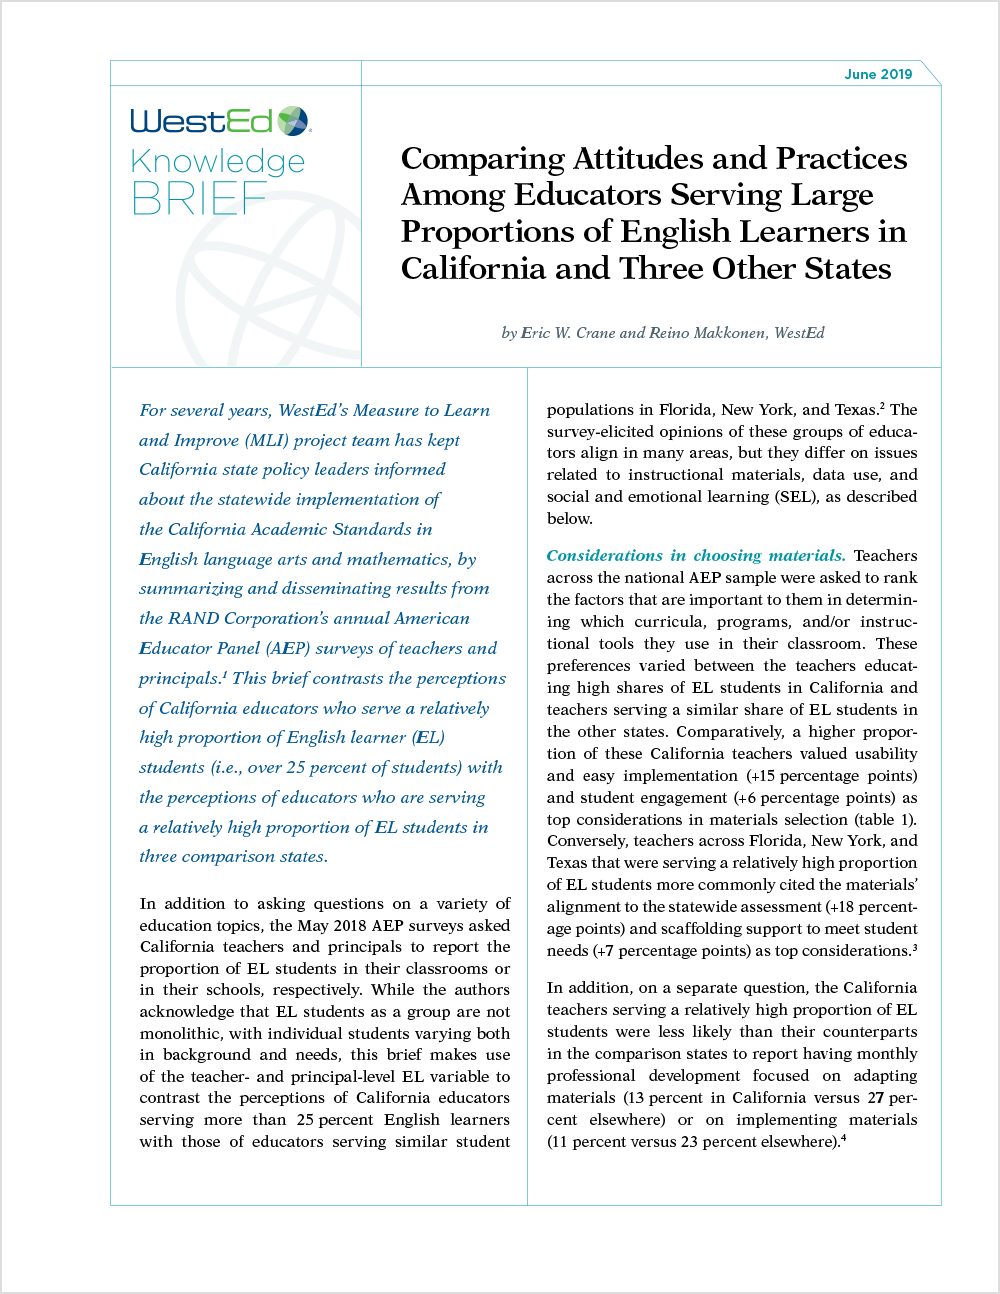 Comparing Attitudes and Practices Among Educators Serving Large Proportions of English Learners in California and Three Other States